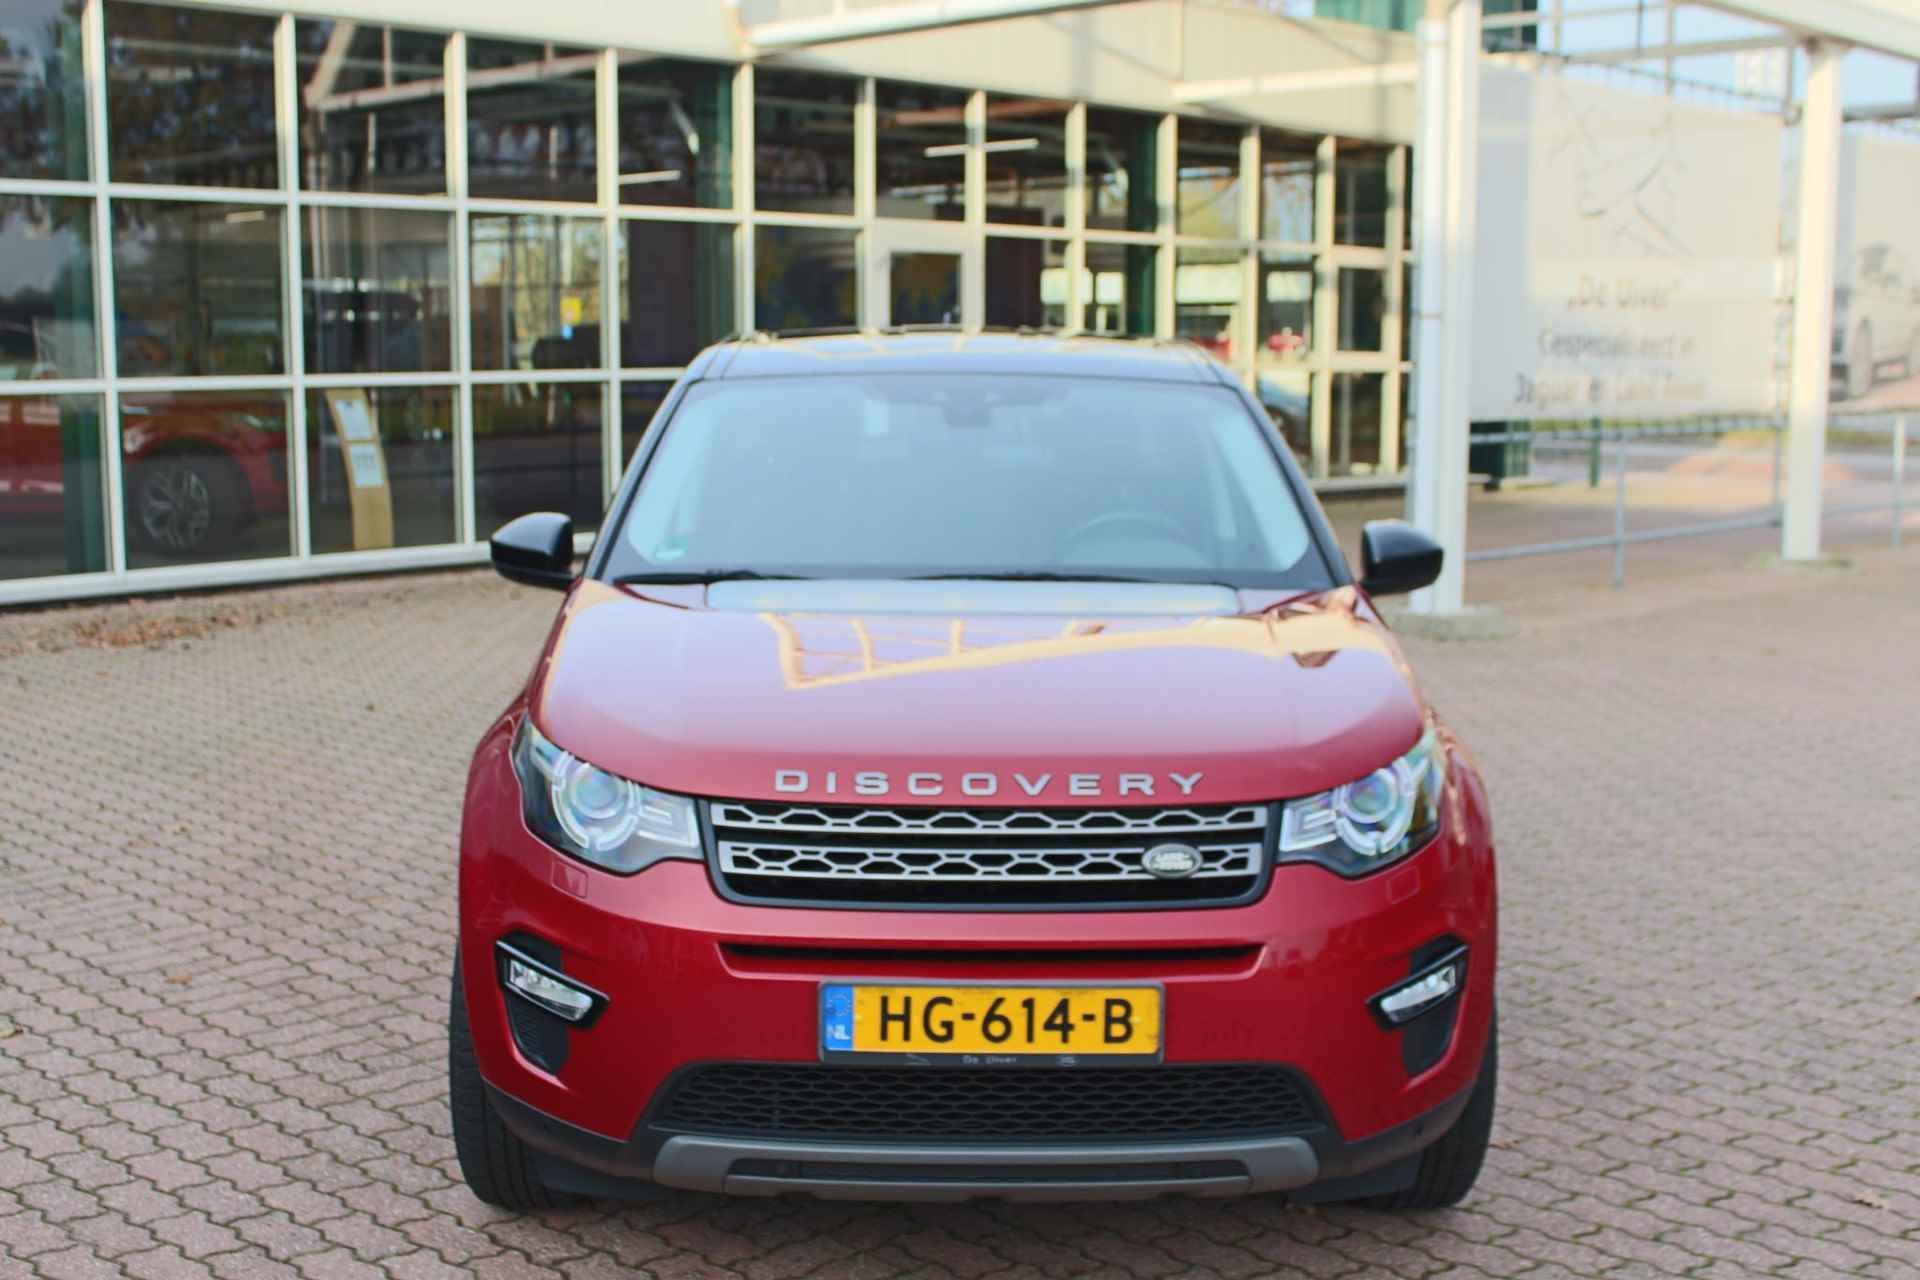 Land Rover Discovery Sport 2.0 TD4 SE 150 pk automaat 1e eigenaar/ DAB+/ Vision Assist Pack/ AHBA/ Xenon + Led/ PDC V+A/ Cold Climate Pack - 5/59